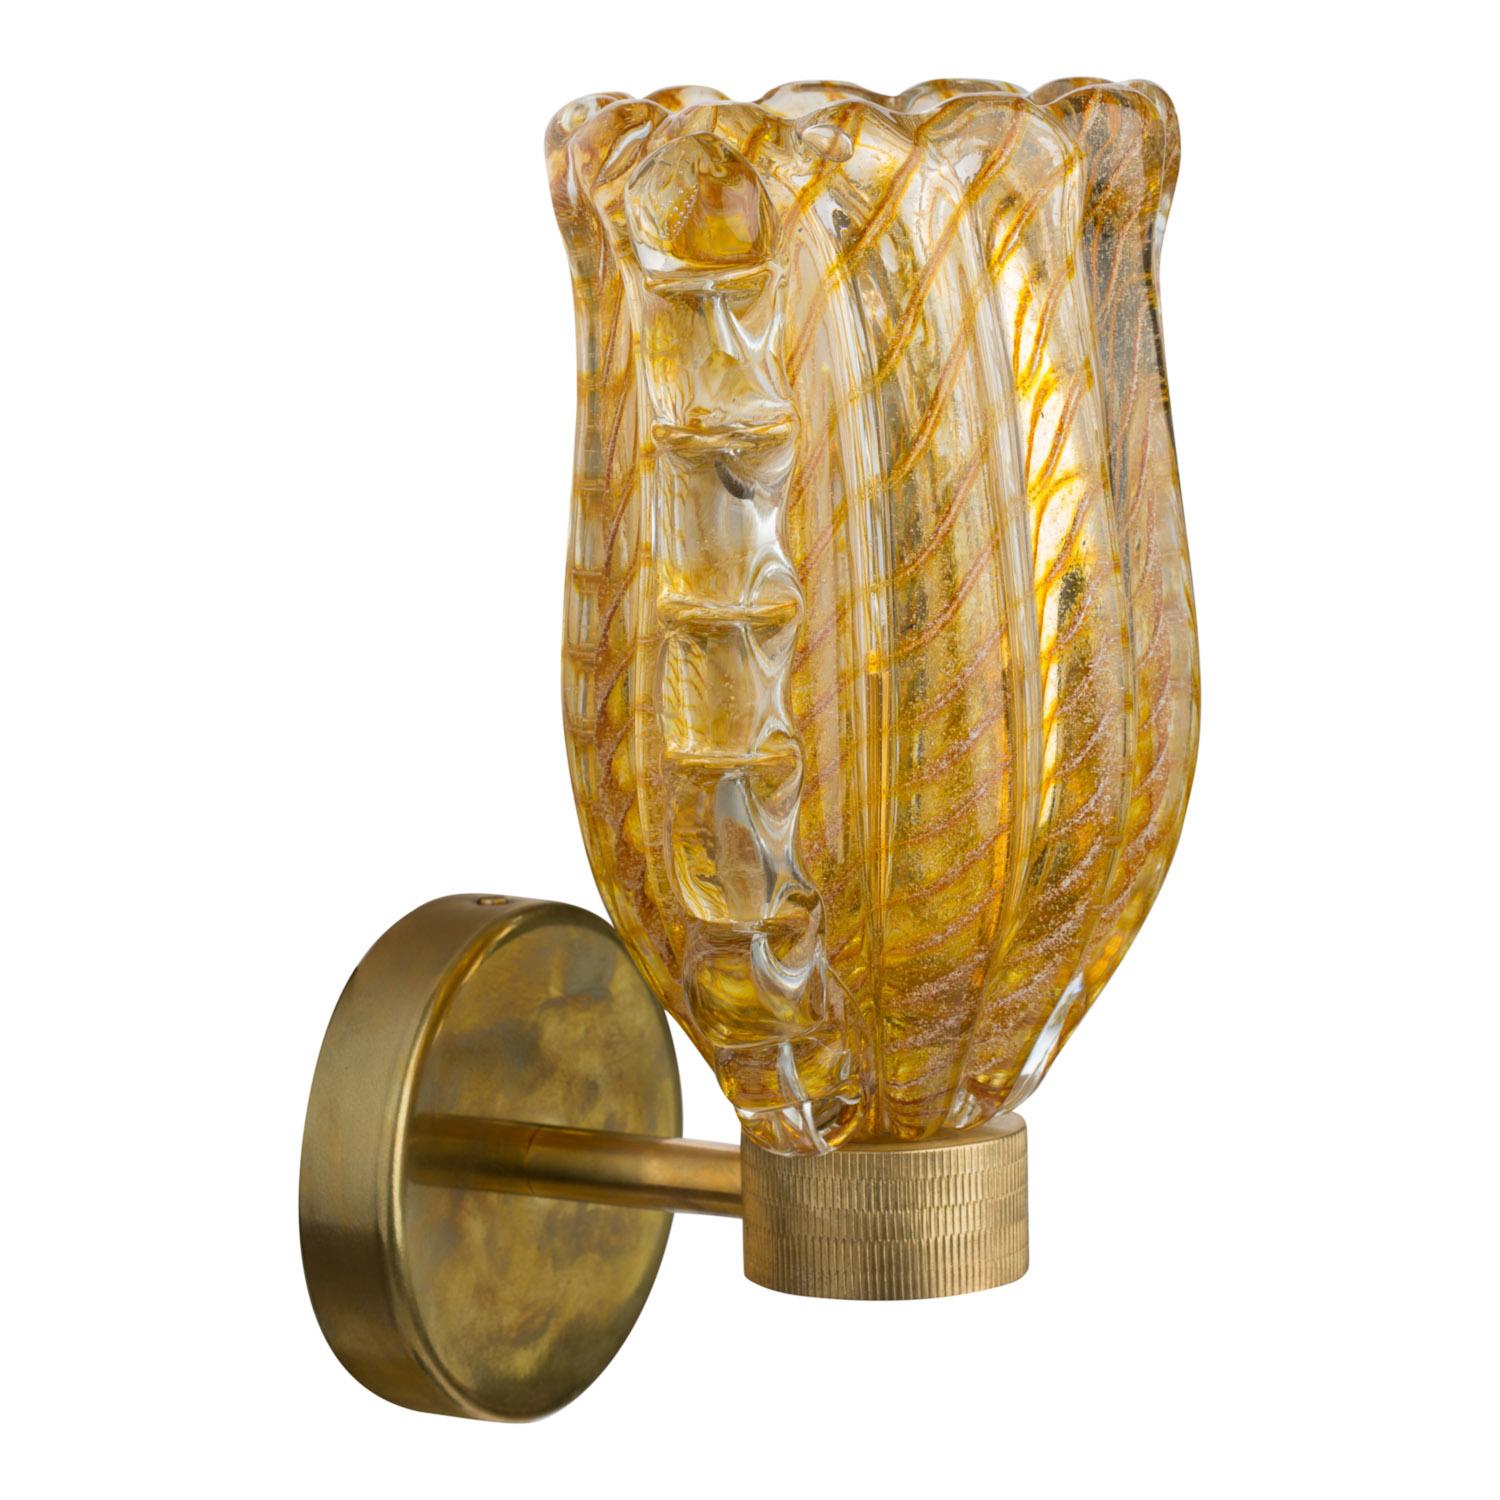 Contemporary Unique Murano Art Glass Sconces in Cristallo 24ct Gold Leaf & Amber Candy Canes For Sale